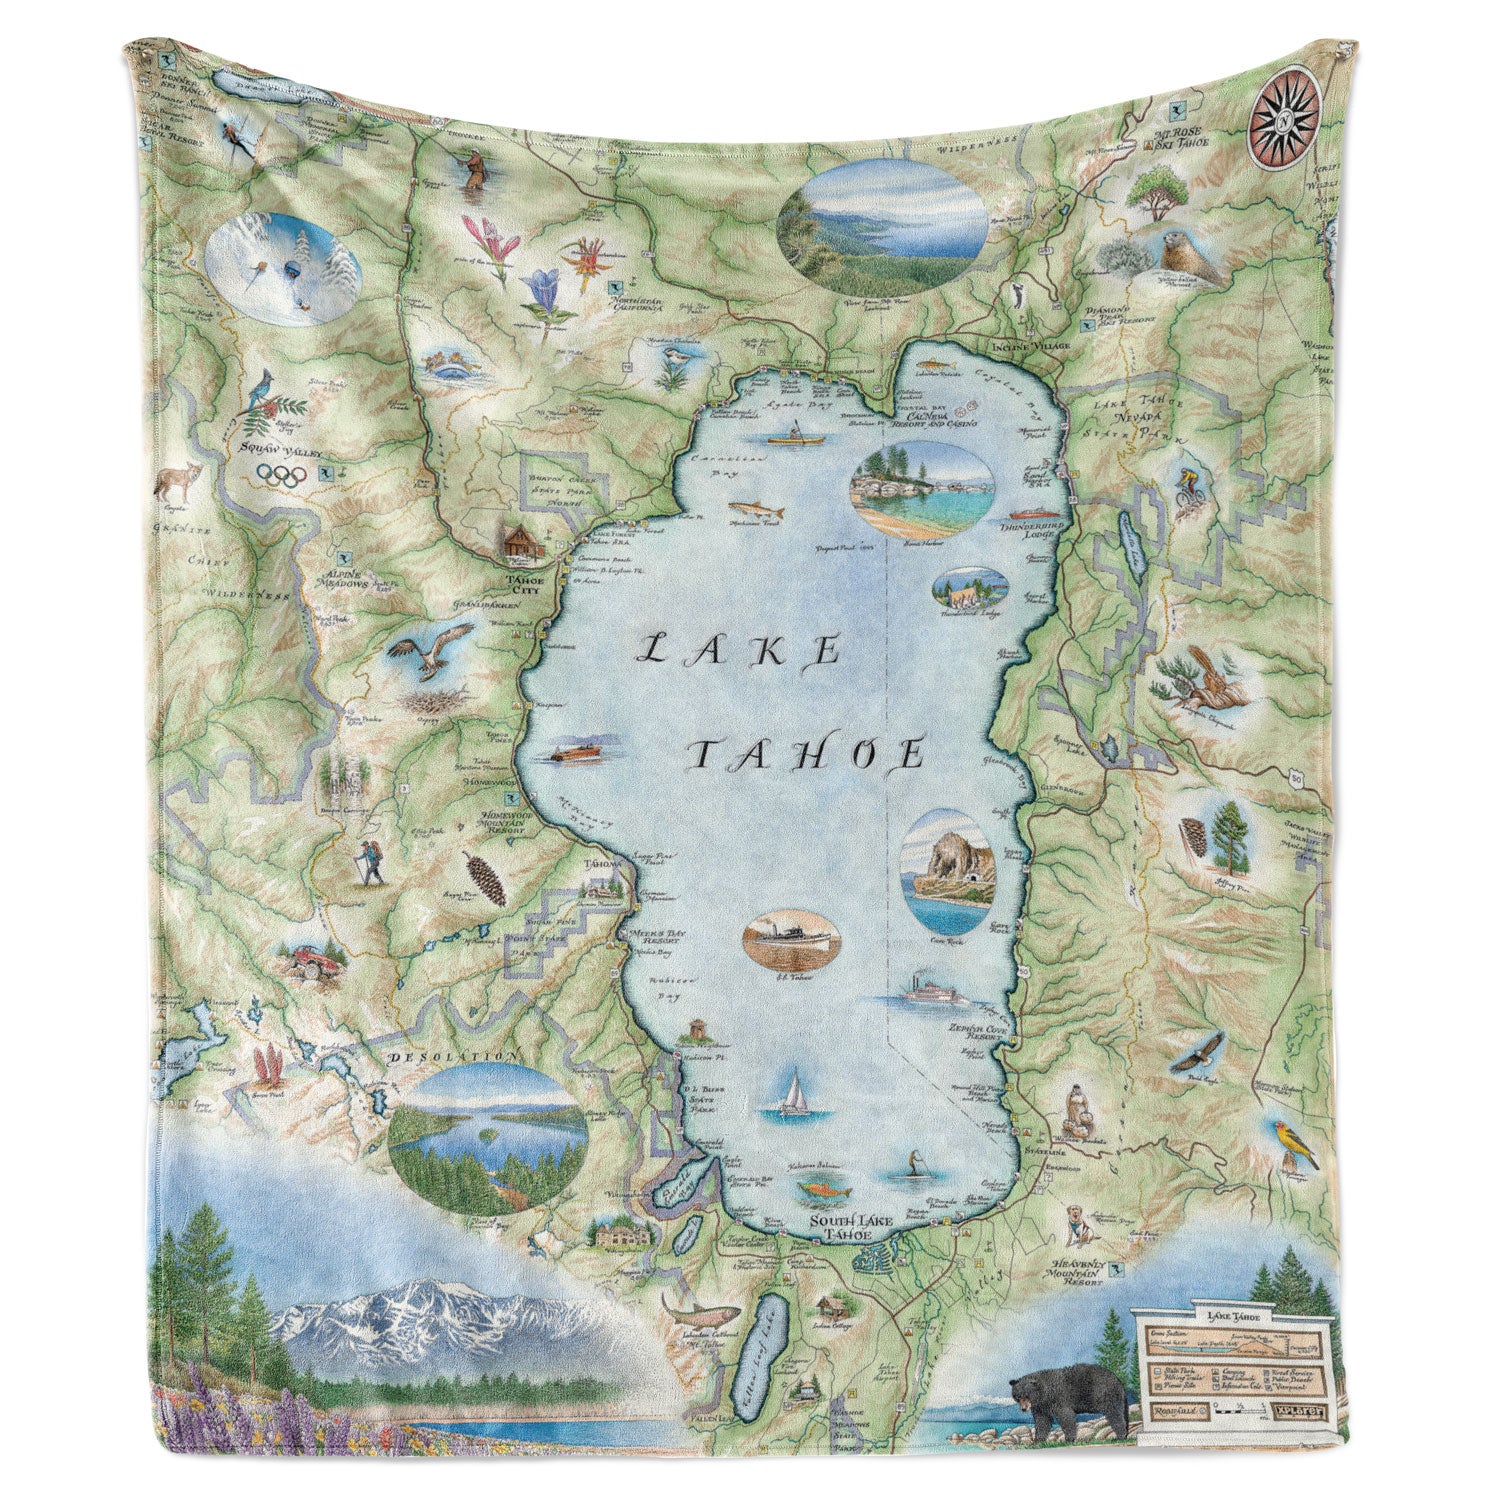 Artistic map of Lake Tahoe on a warm blanket.